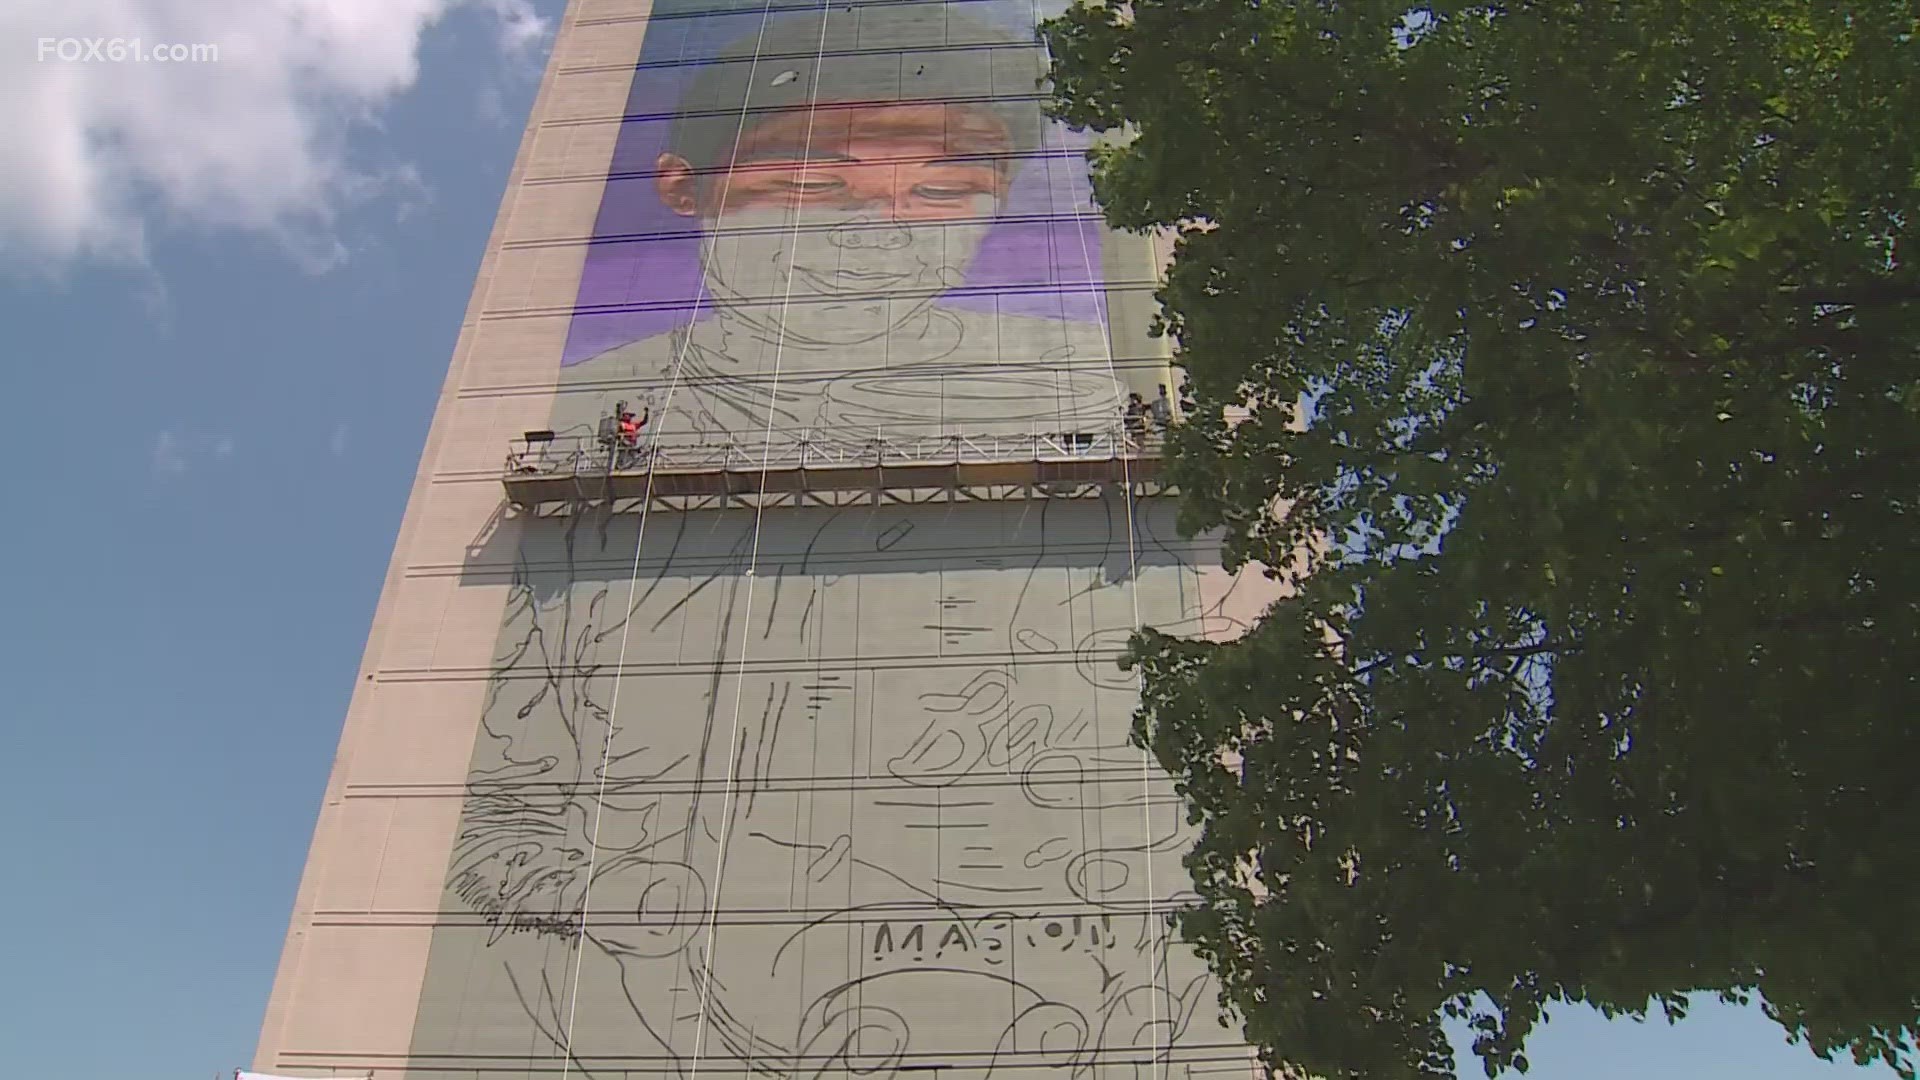 The mural has yet to have a formal name, but it is already making a statement on Morgan Street in Downtown Hartford.